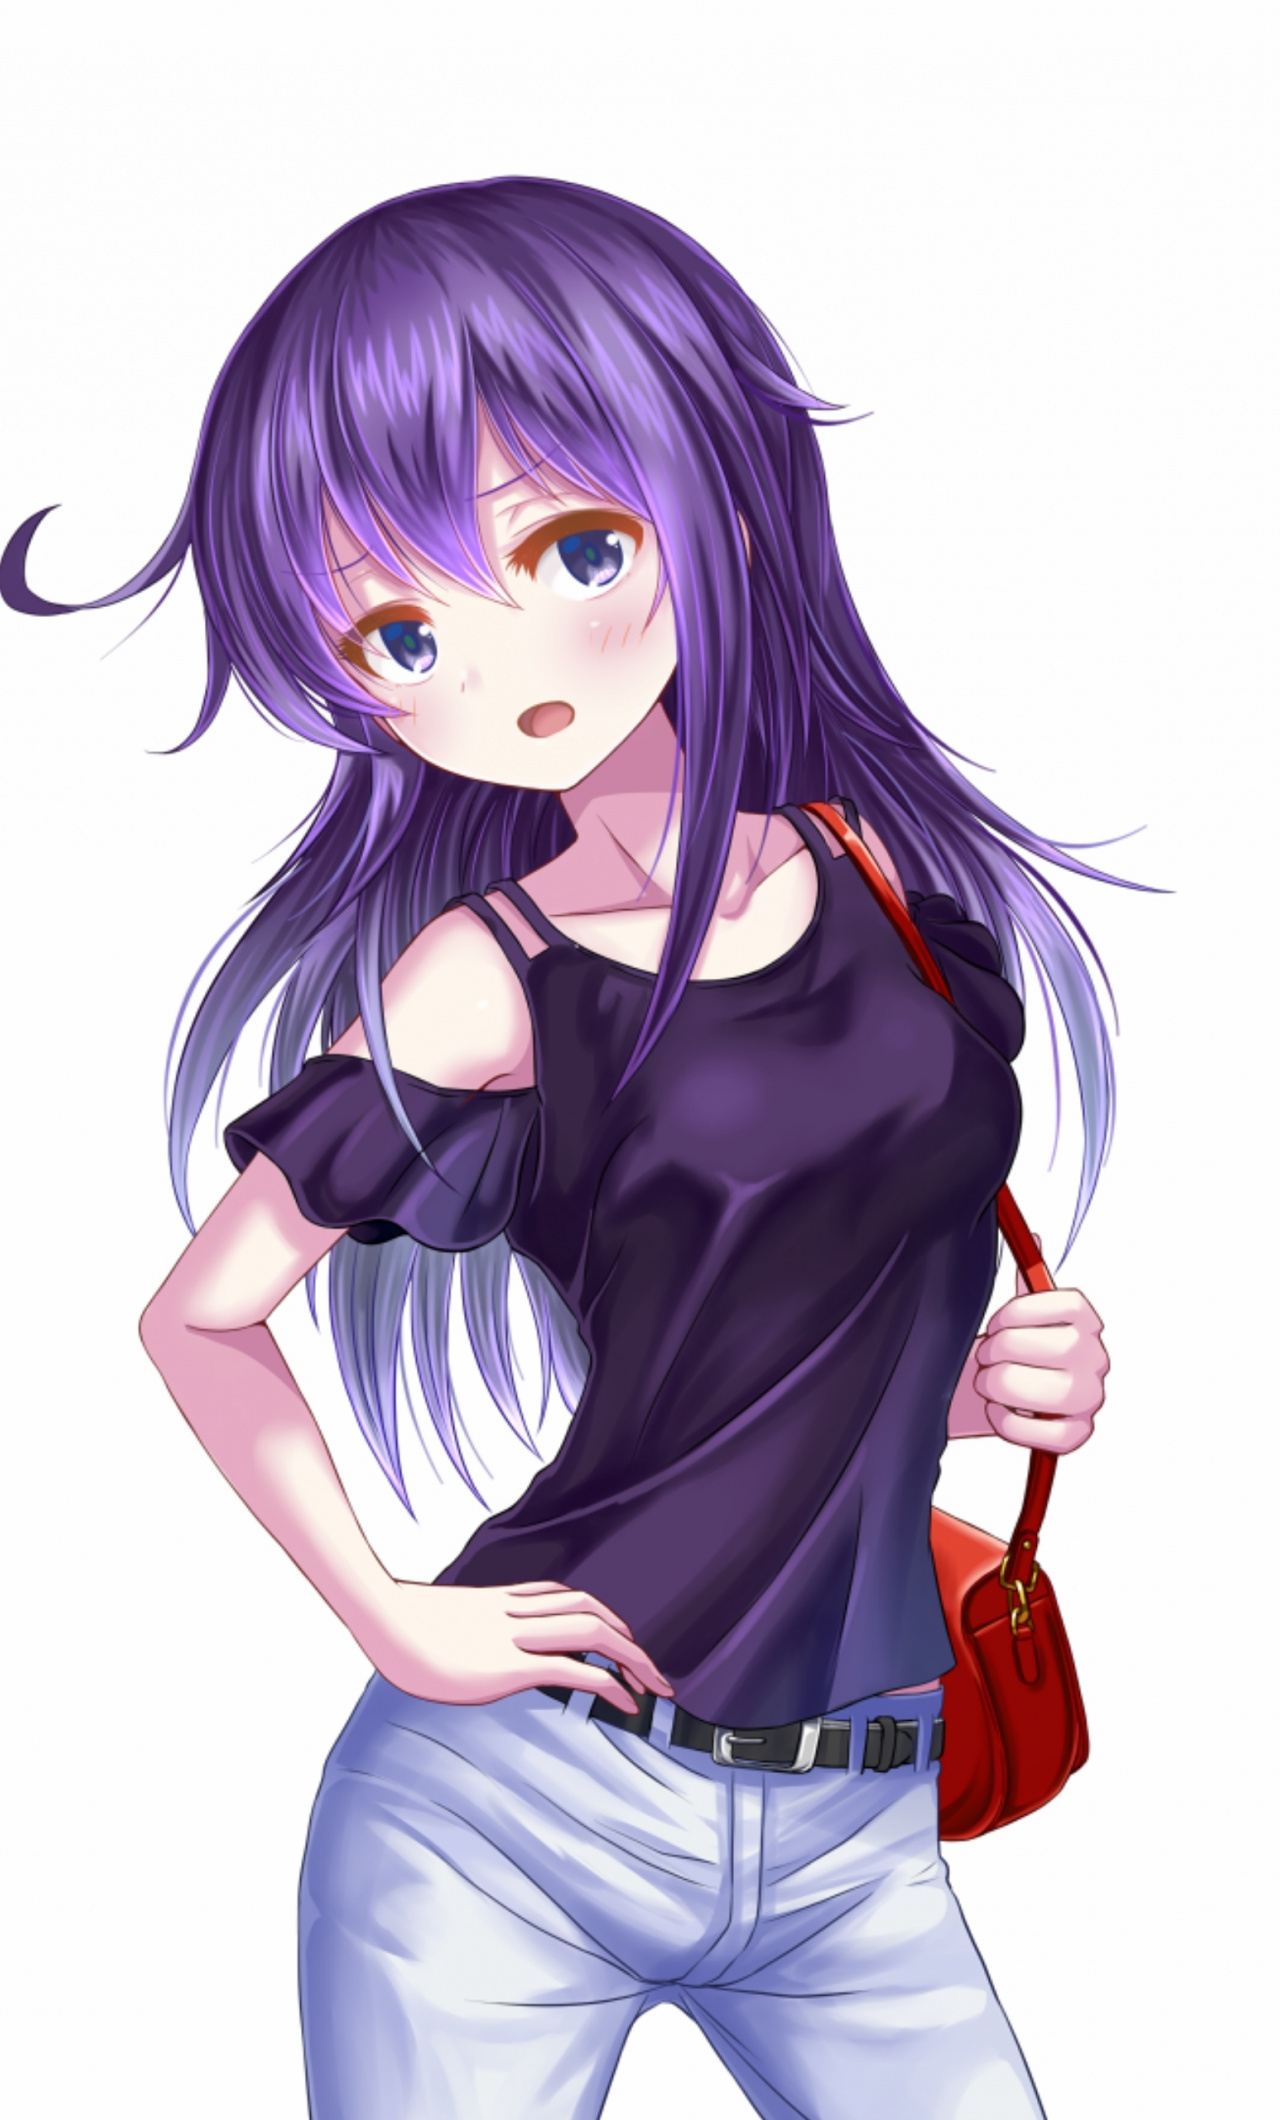 Pictures Of Anime Girls With Purple Hair / Check out this fantastic